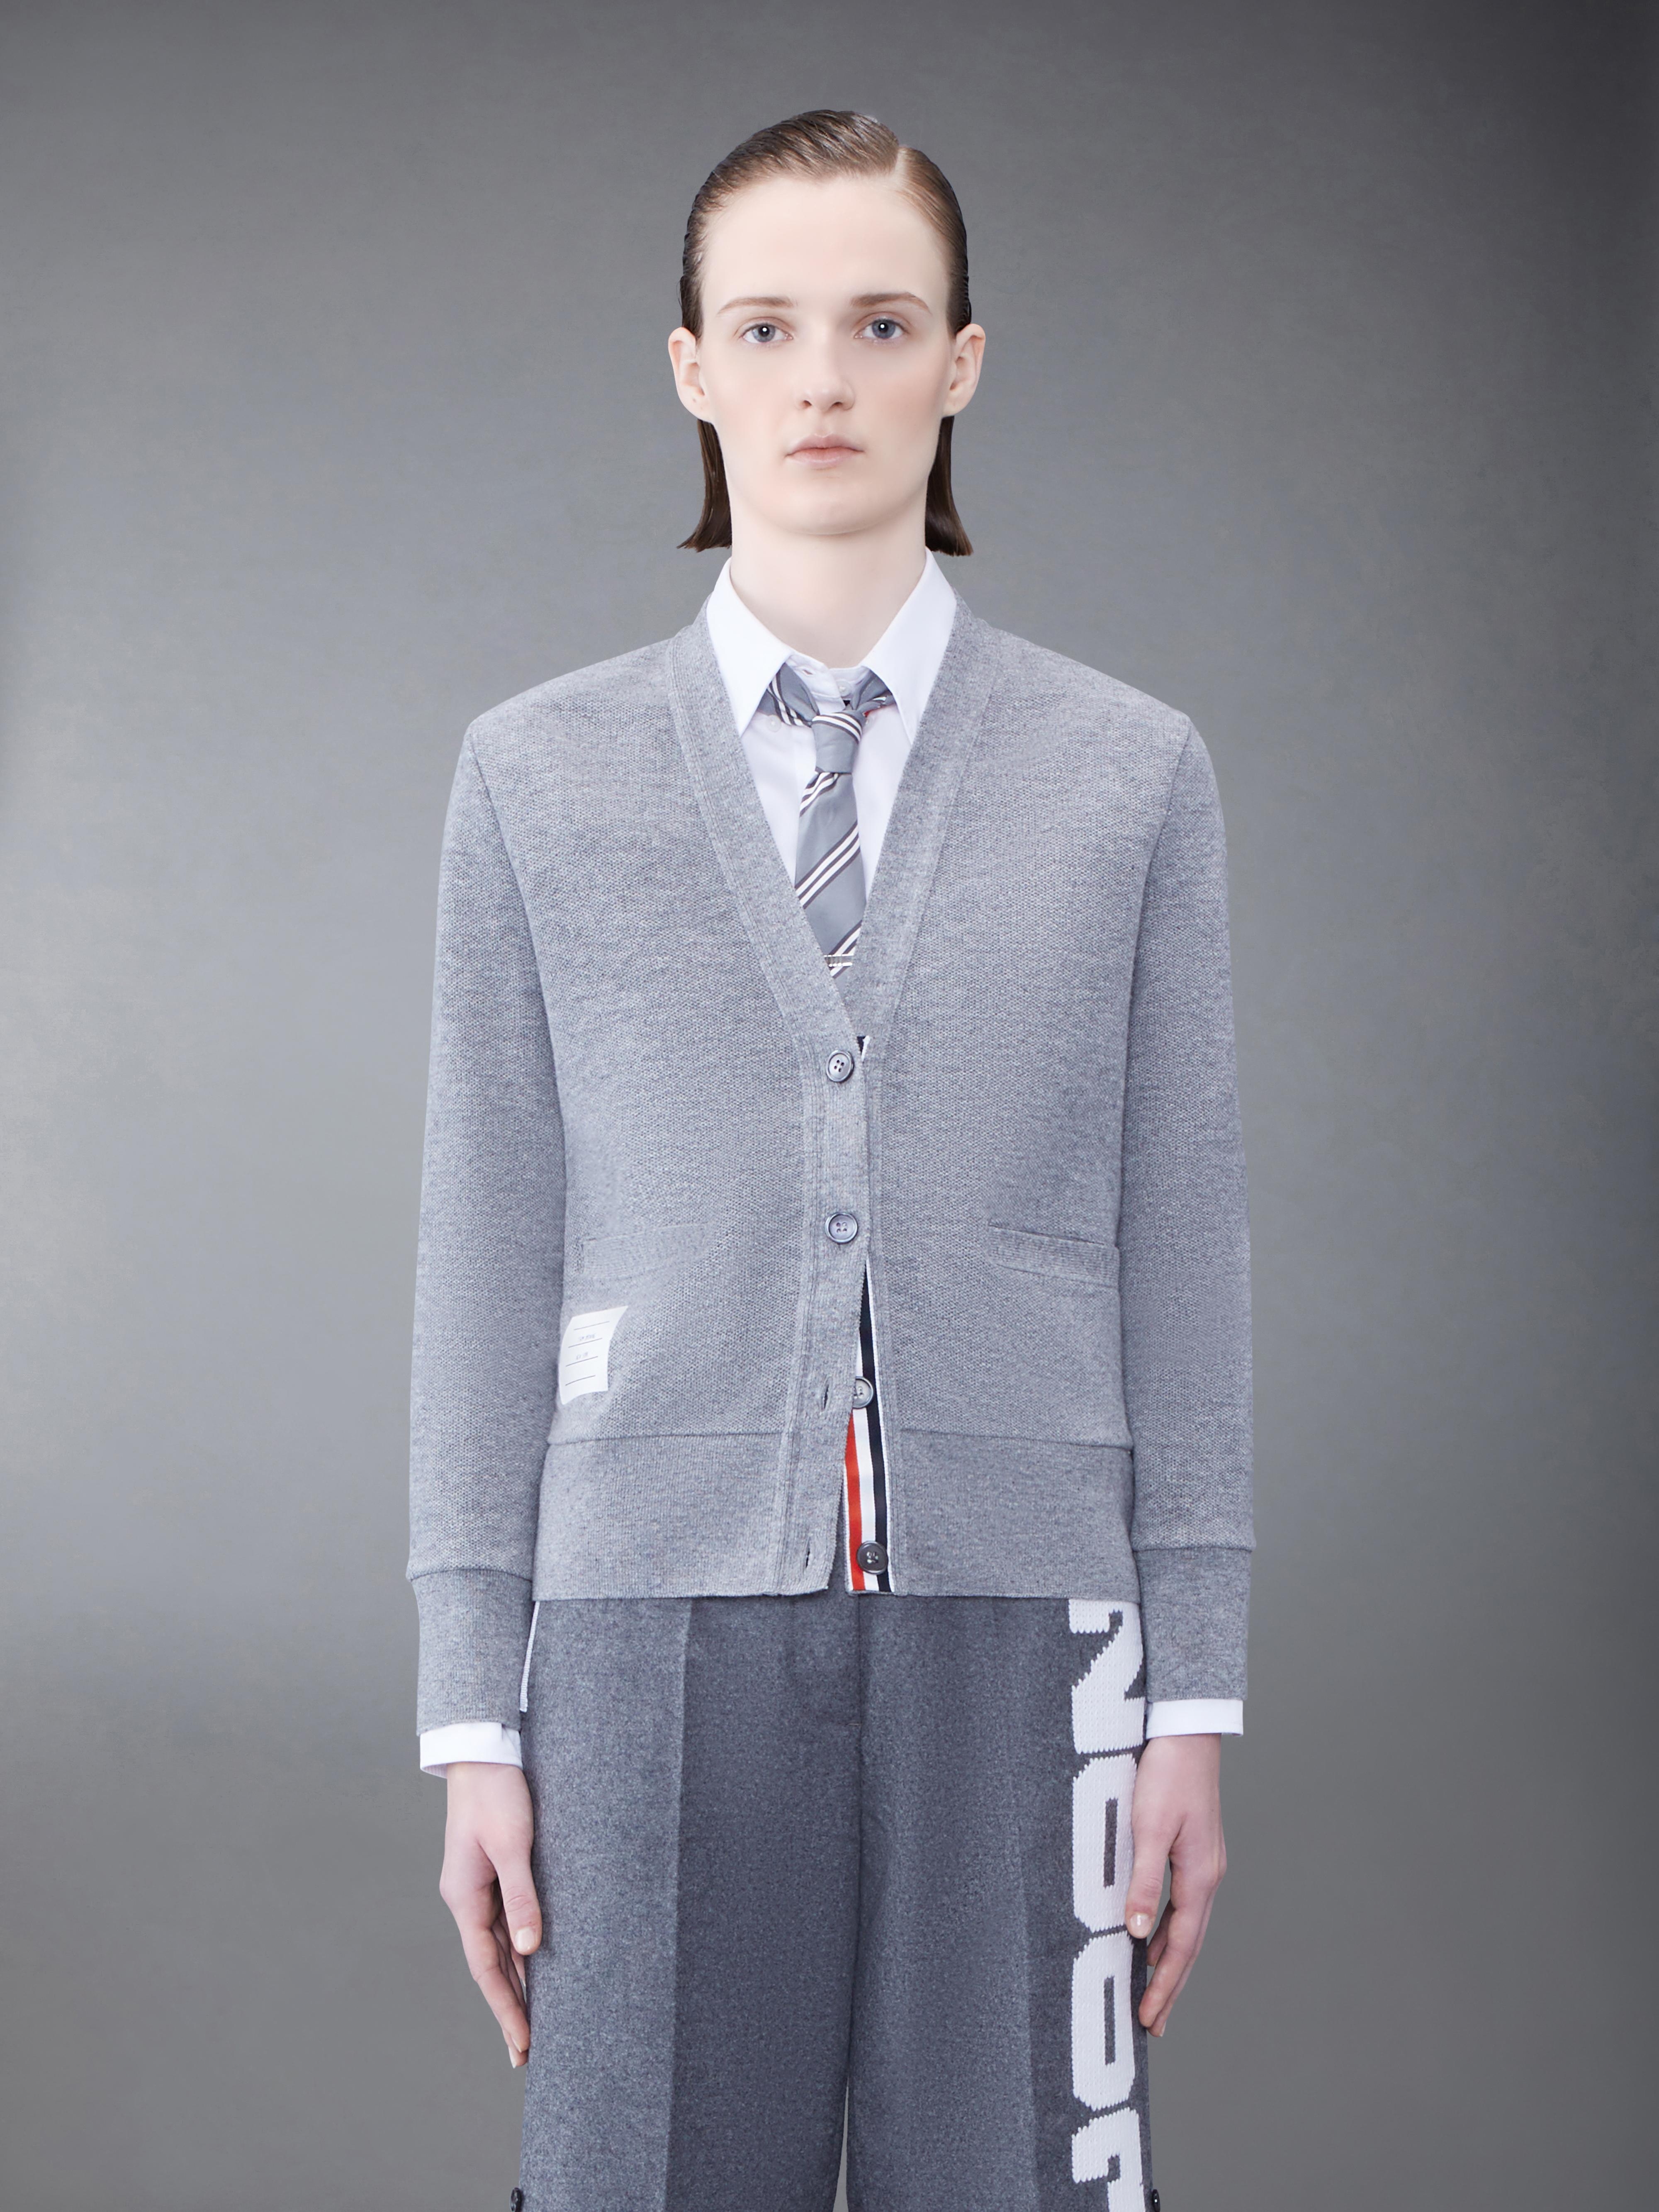 THOM BROWNE 20TH ANNIVERSARY CAPSULE COLLECTION 